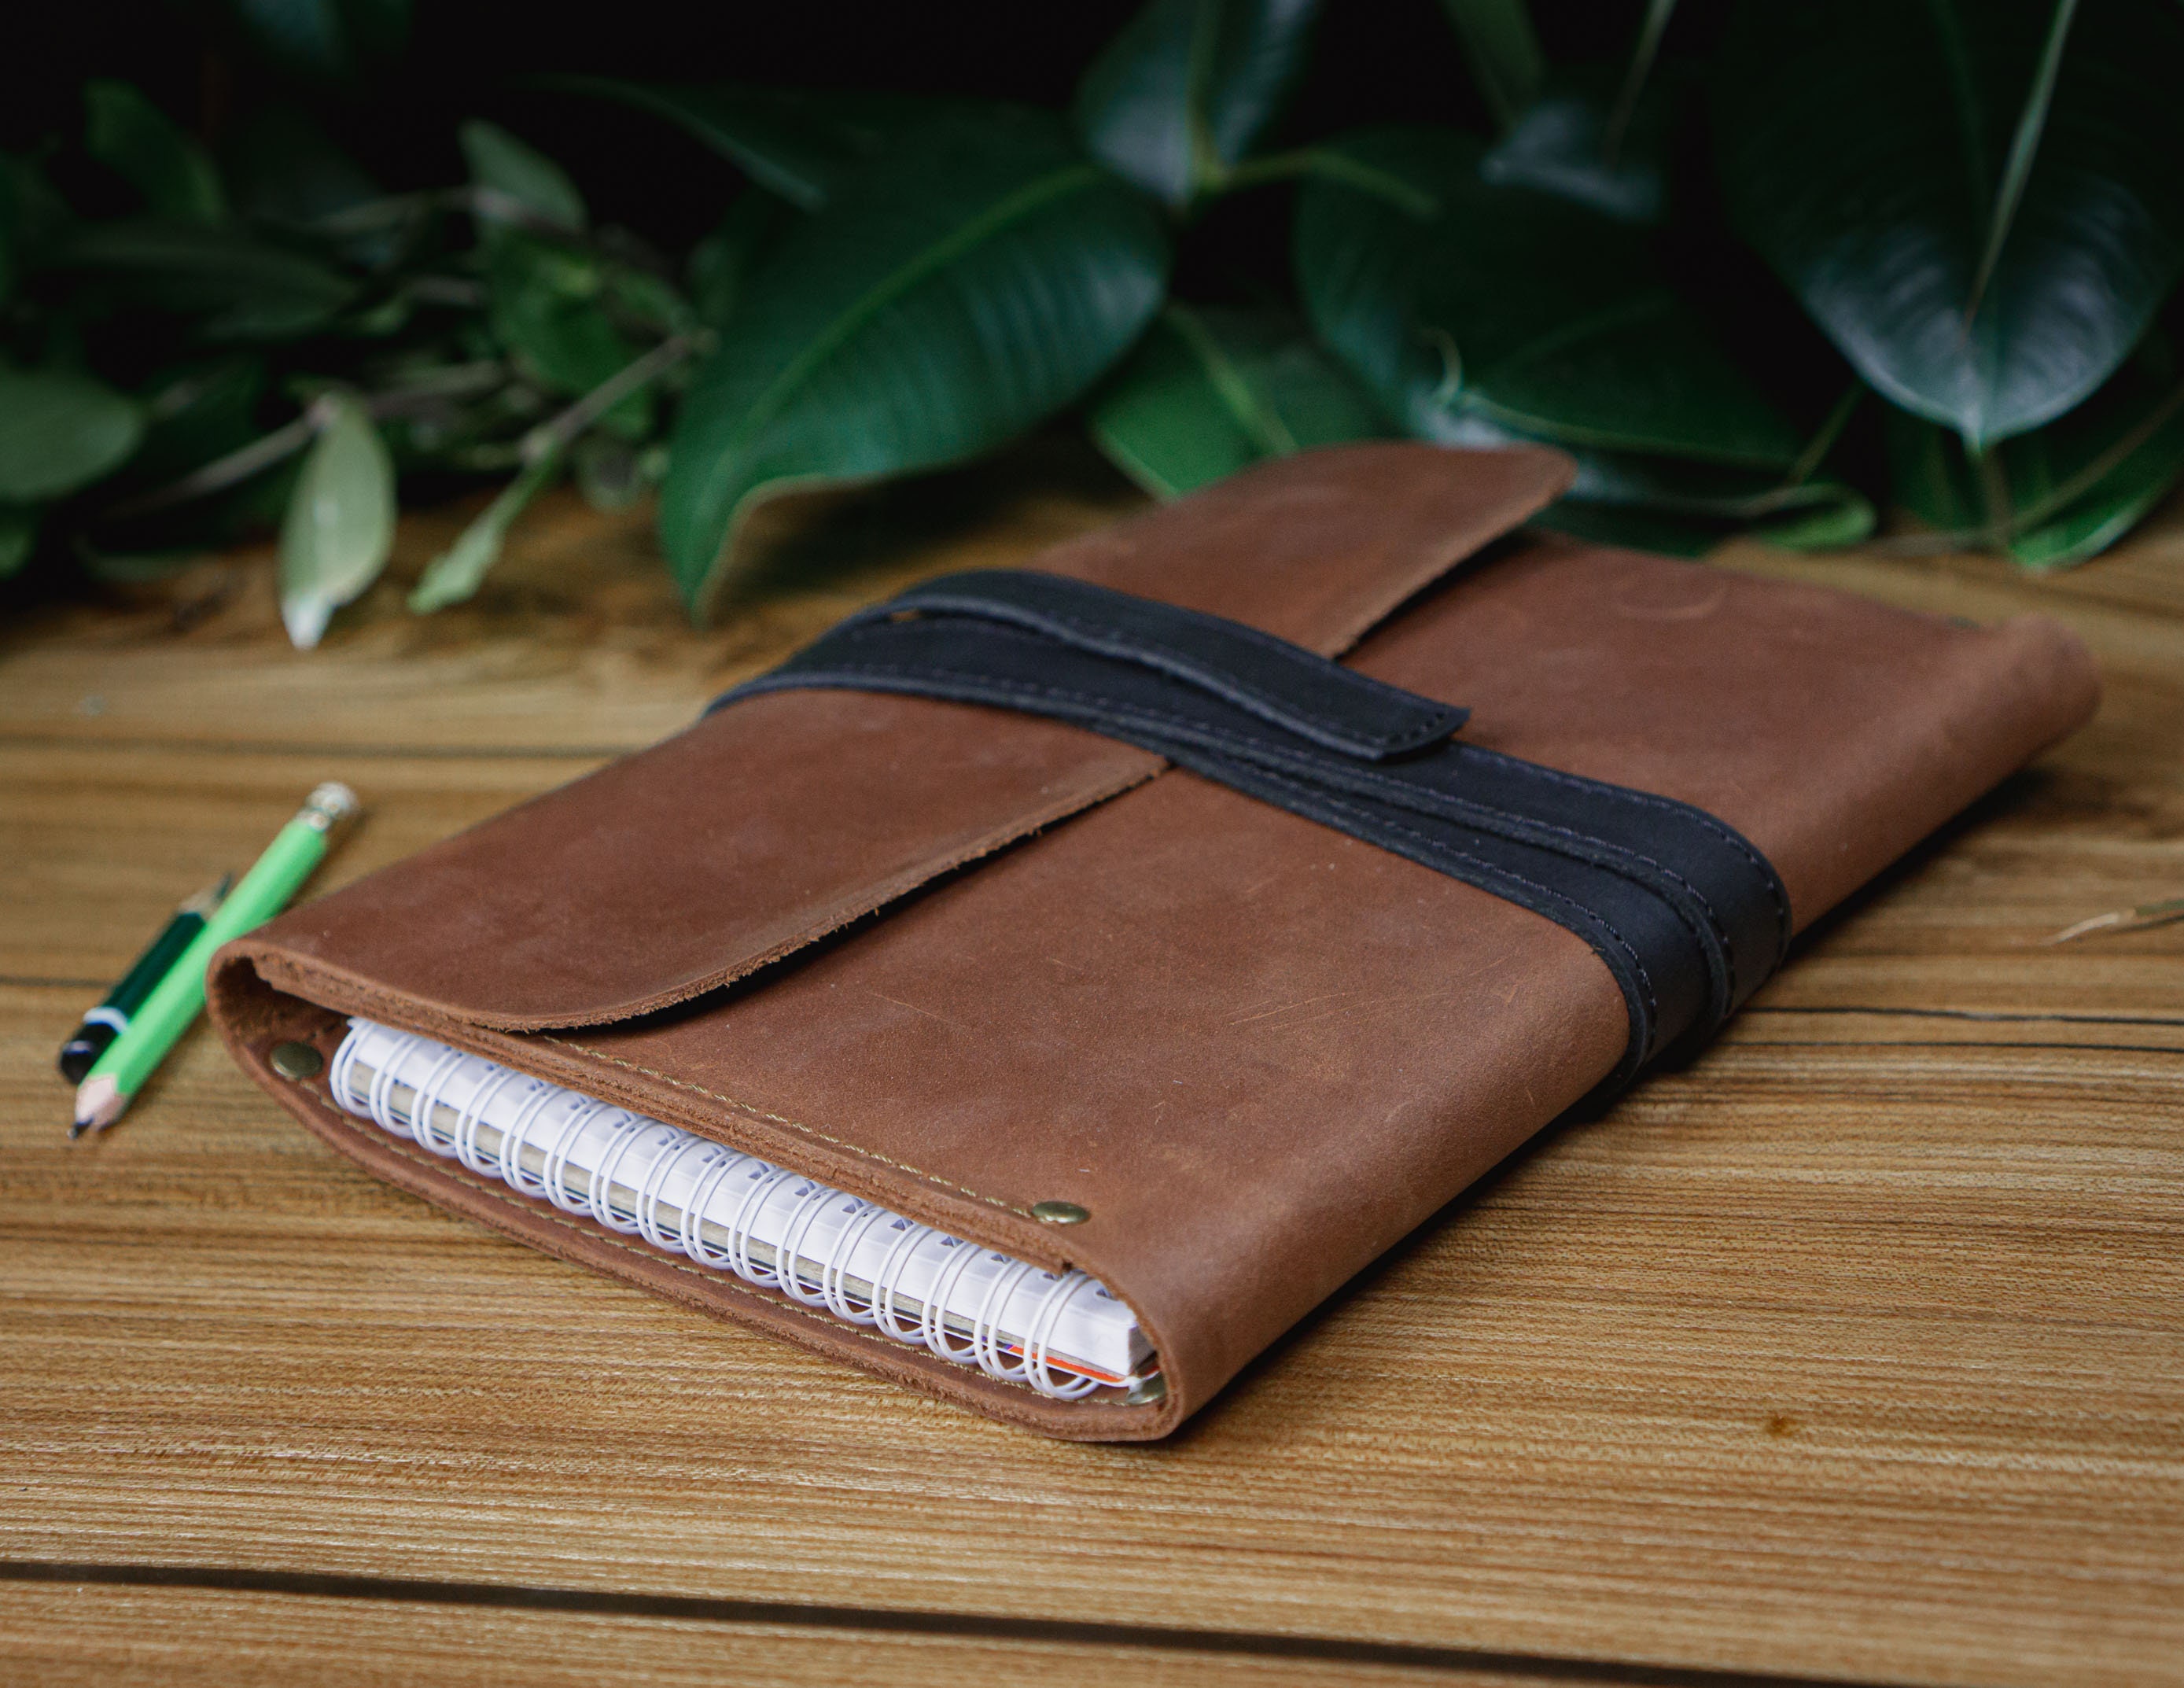 Unlined Leather Sketchbook Personalized Gift for Artists